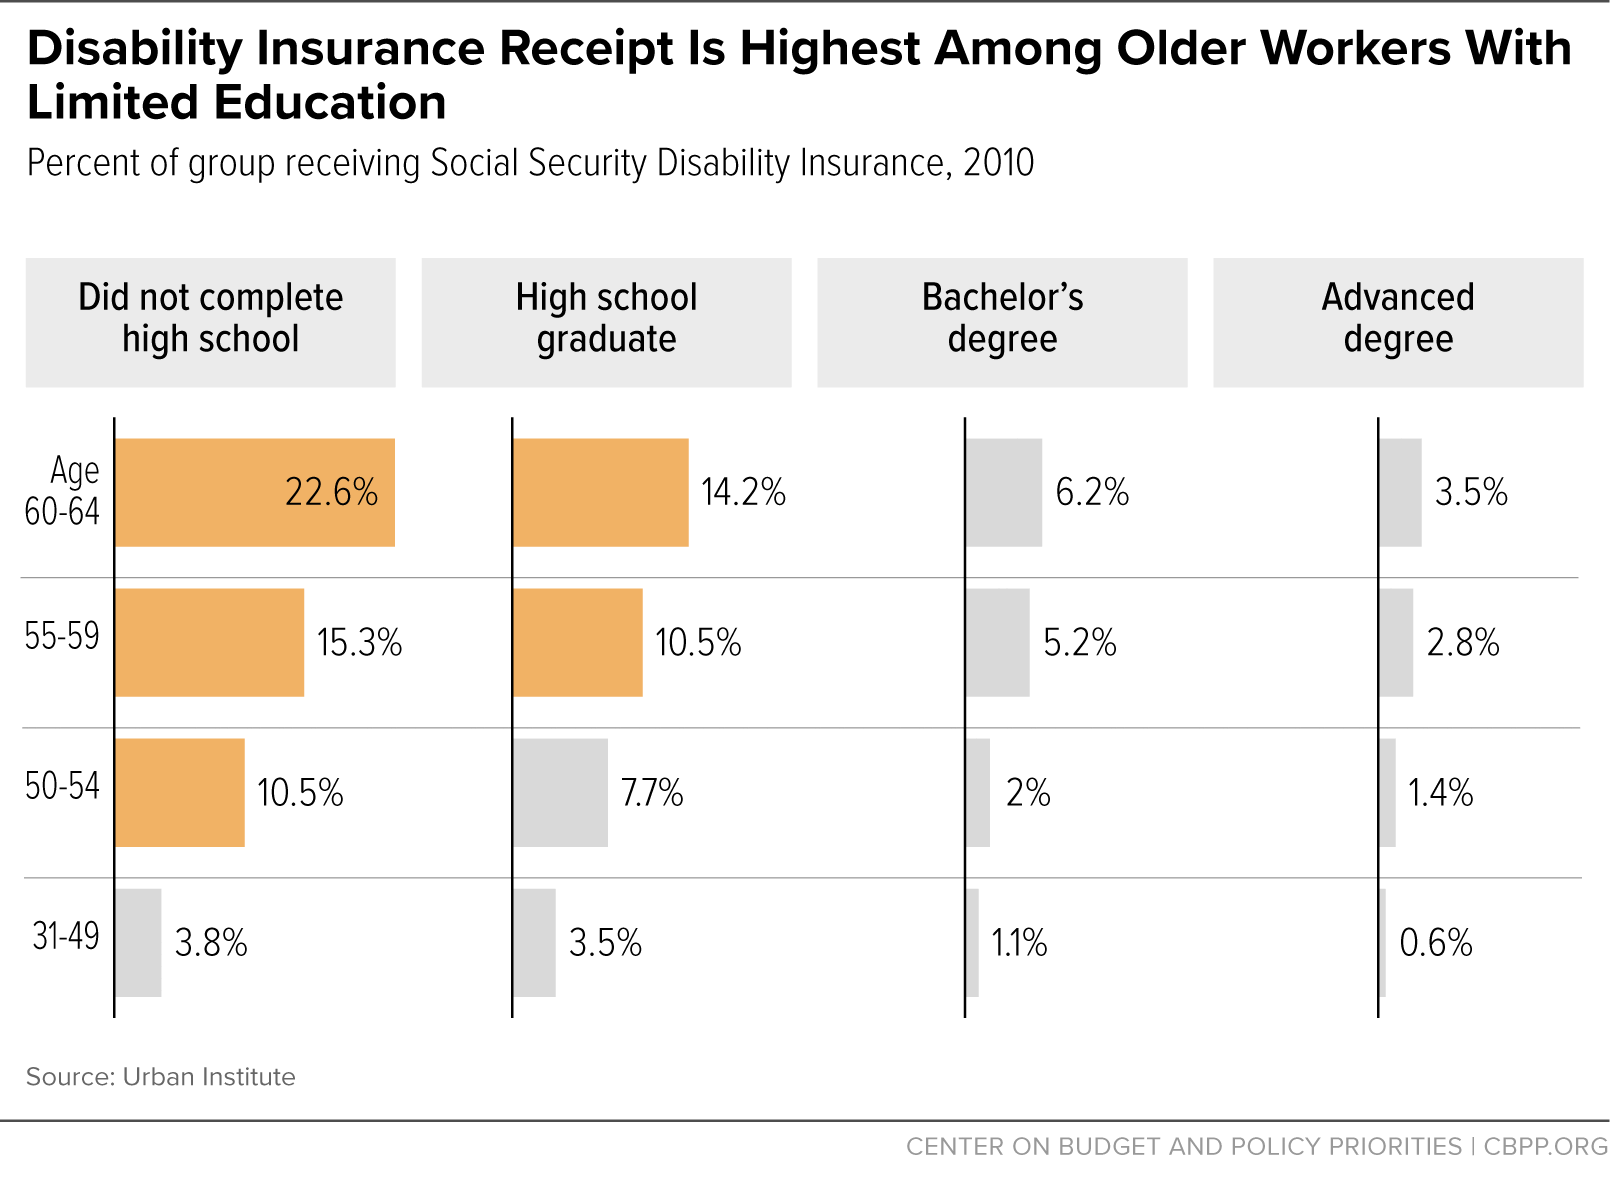 Disability Insurance Receipt Is Highest Among Older Workers With Limited Education